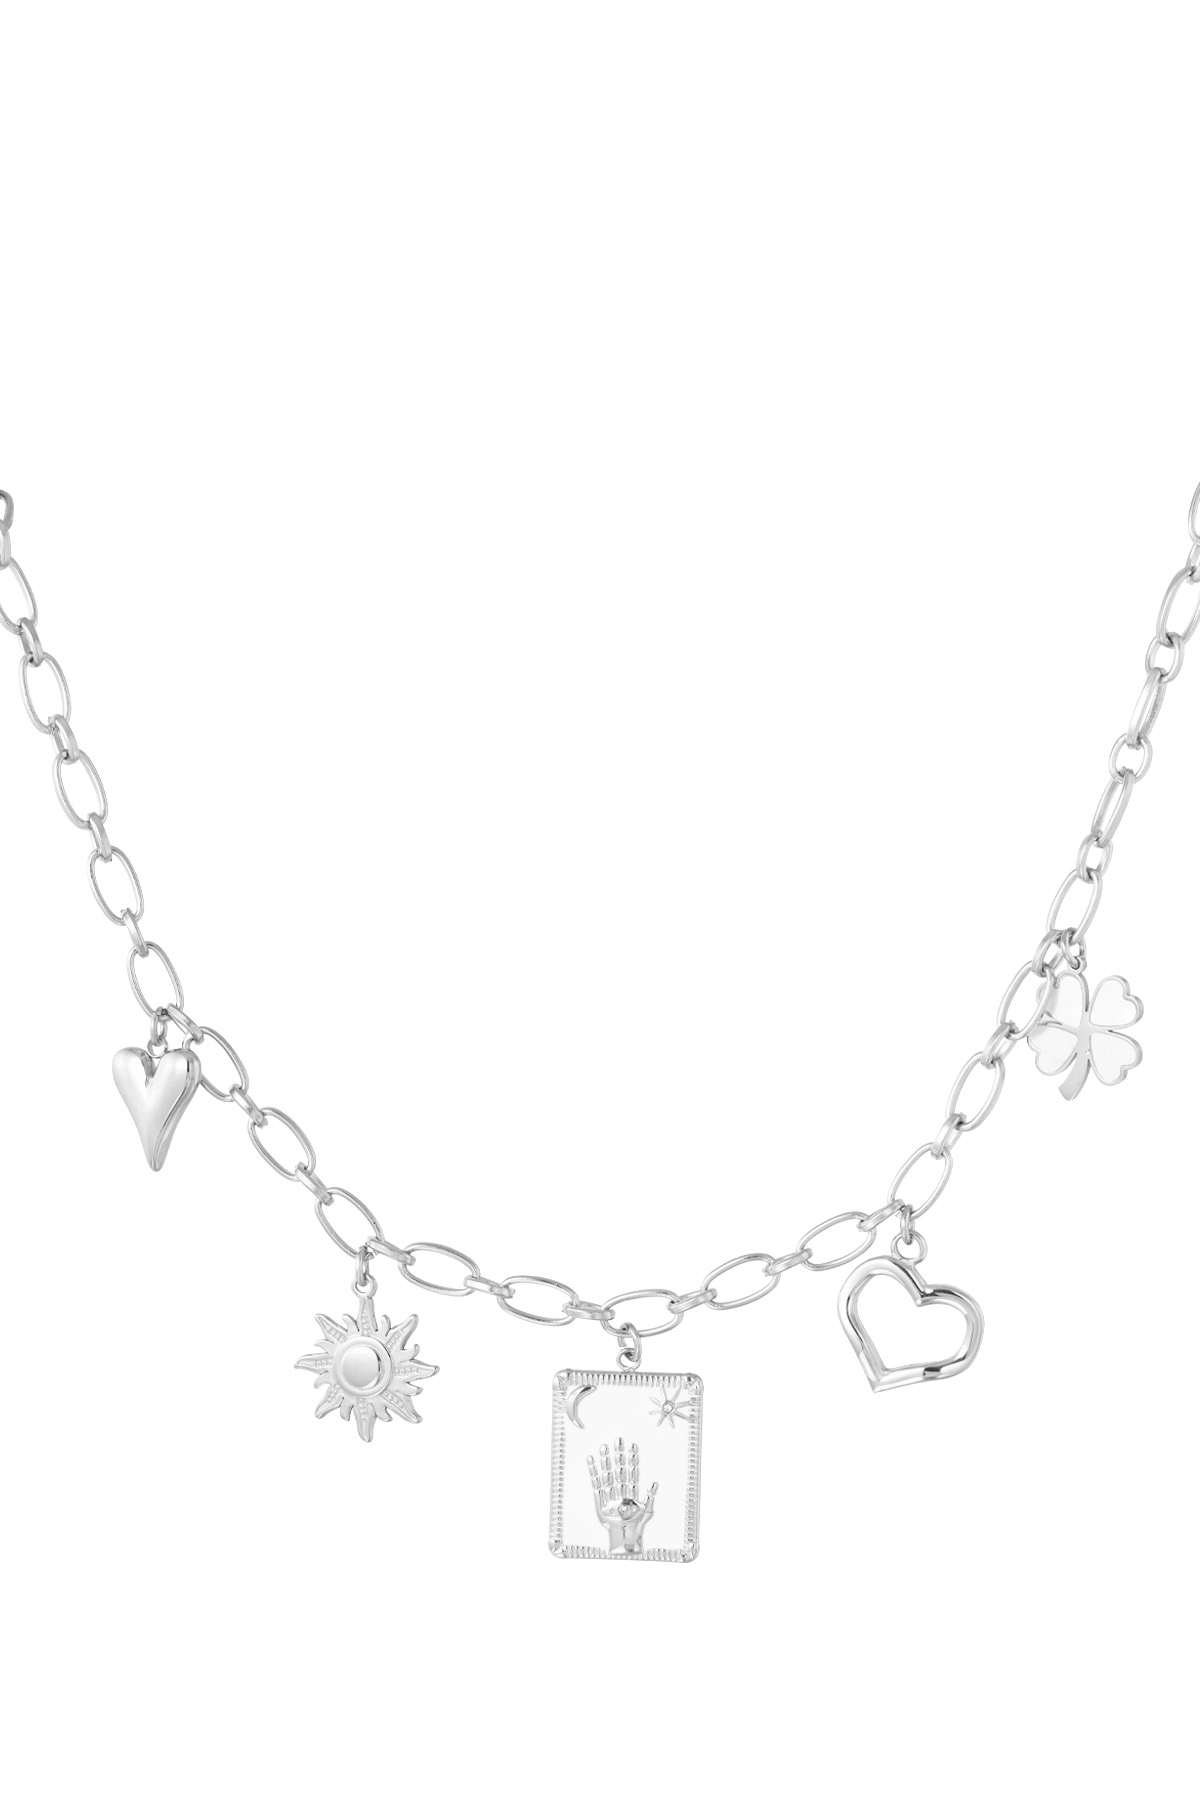 Charm necklace raise your hand - silver